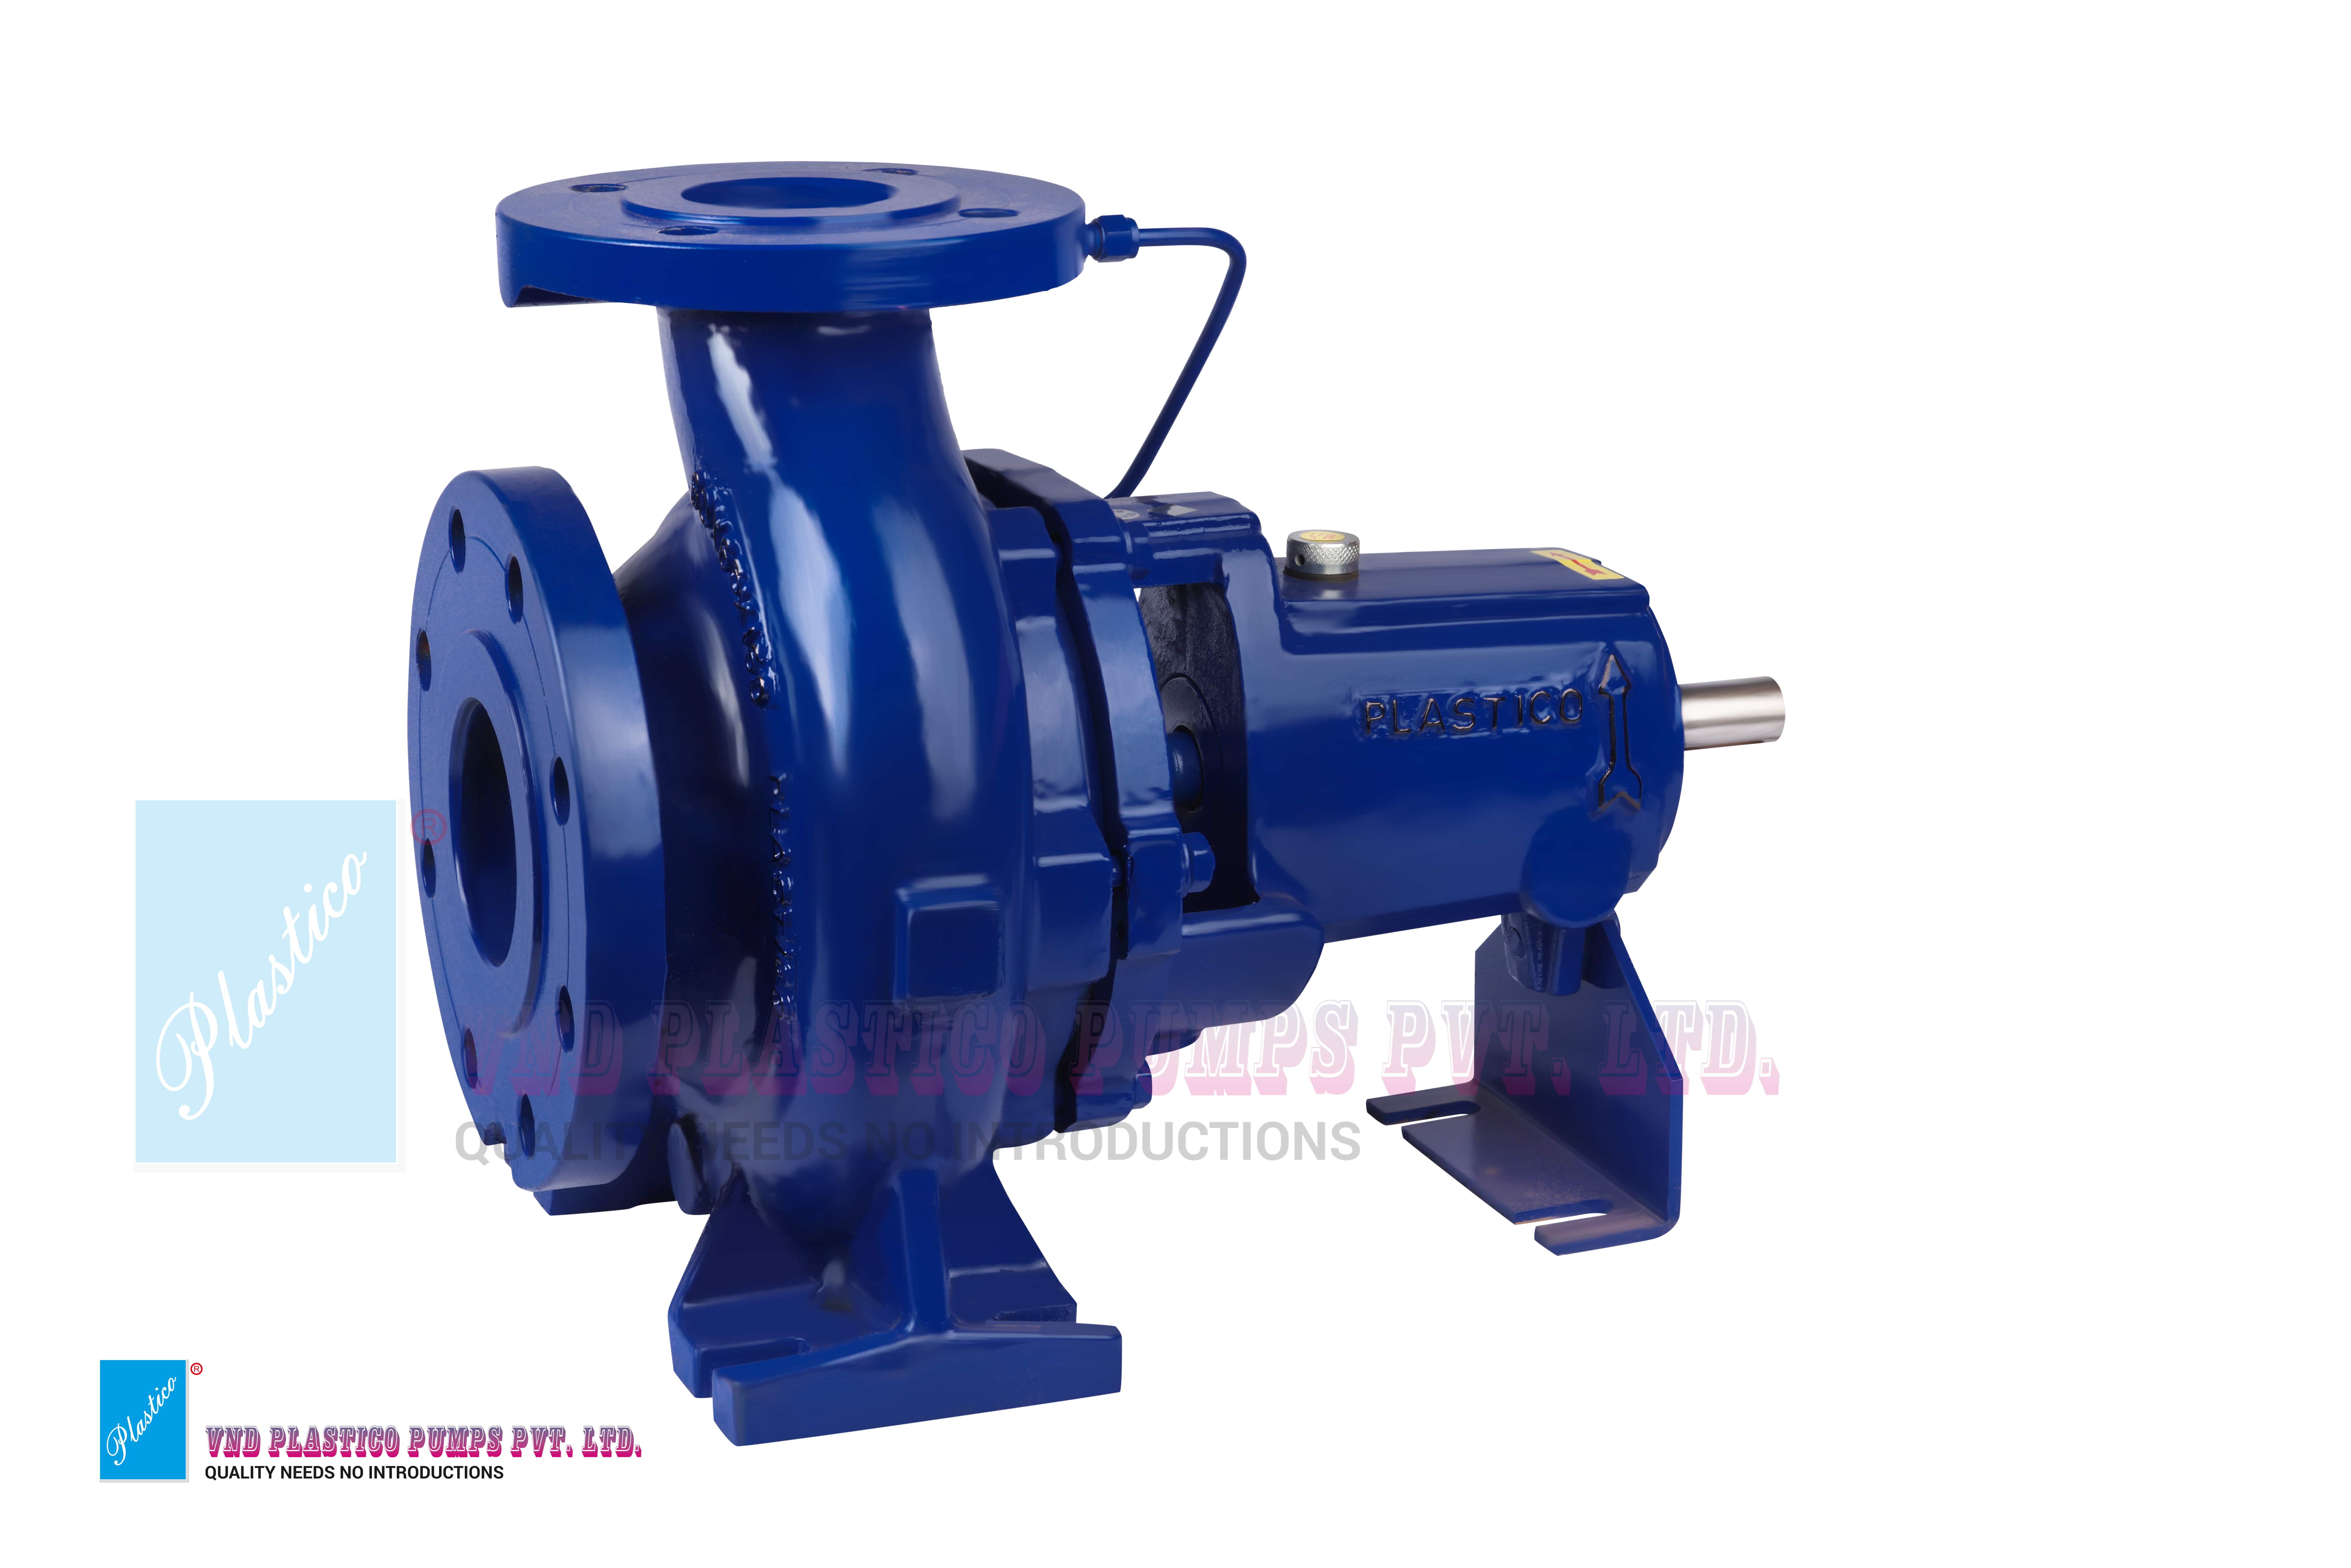 Top 10 Centrifugal Pump Applications that Boost Efficiency